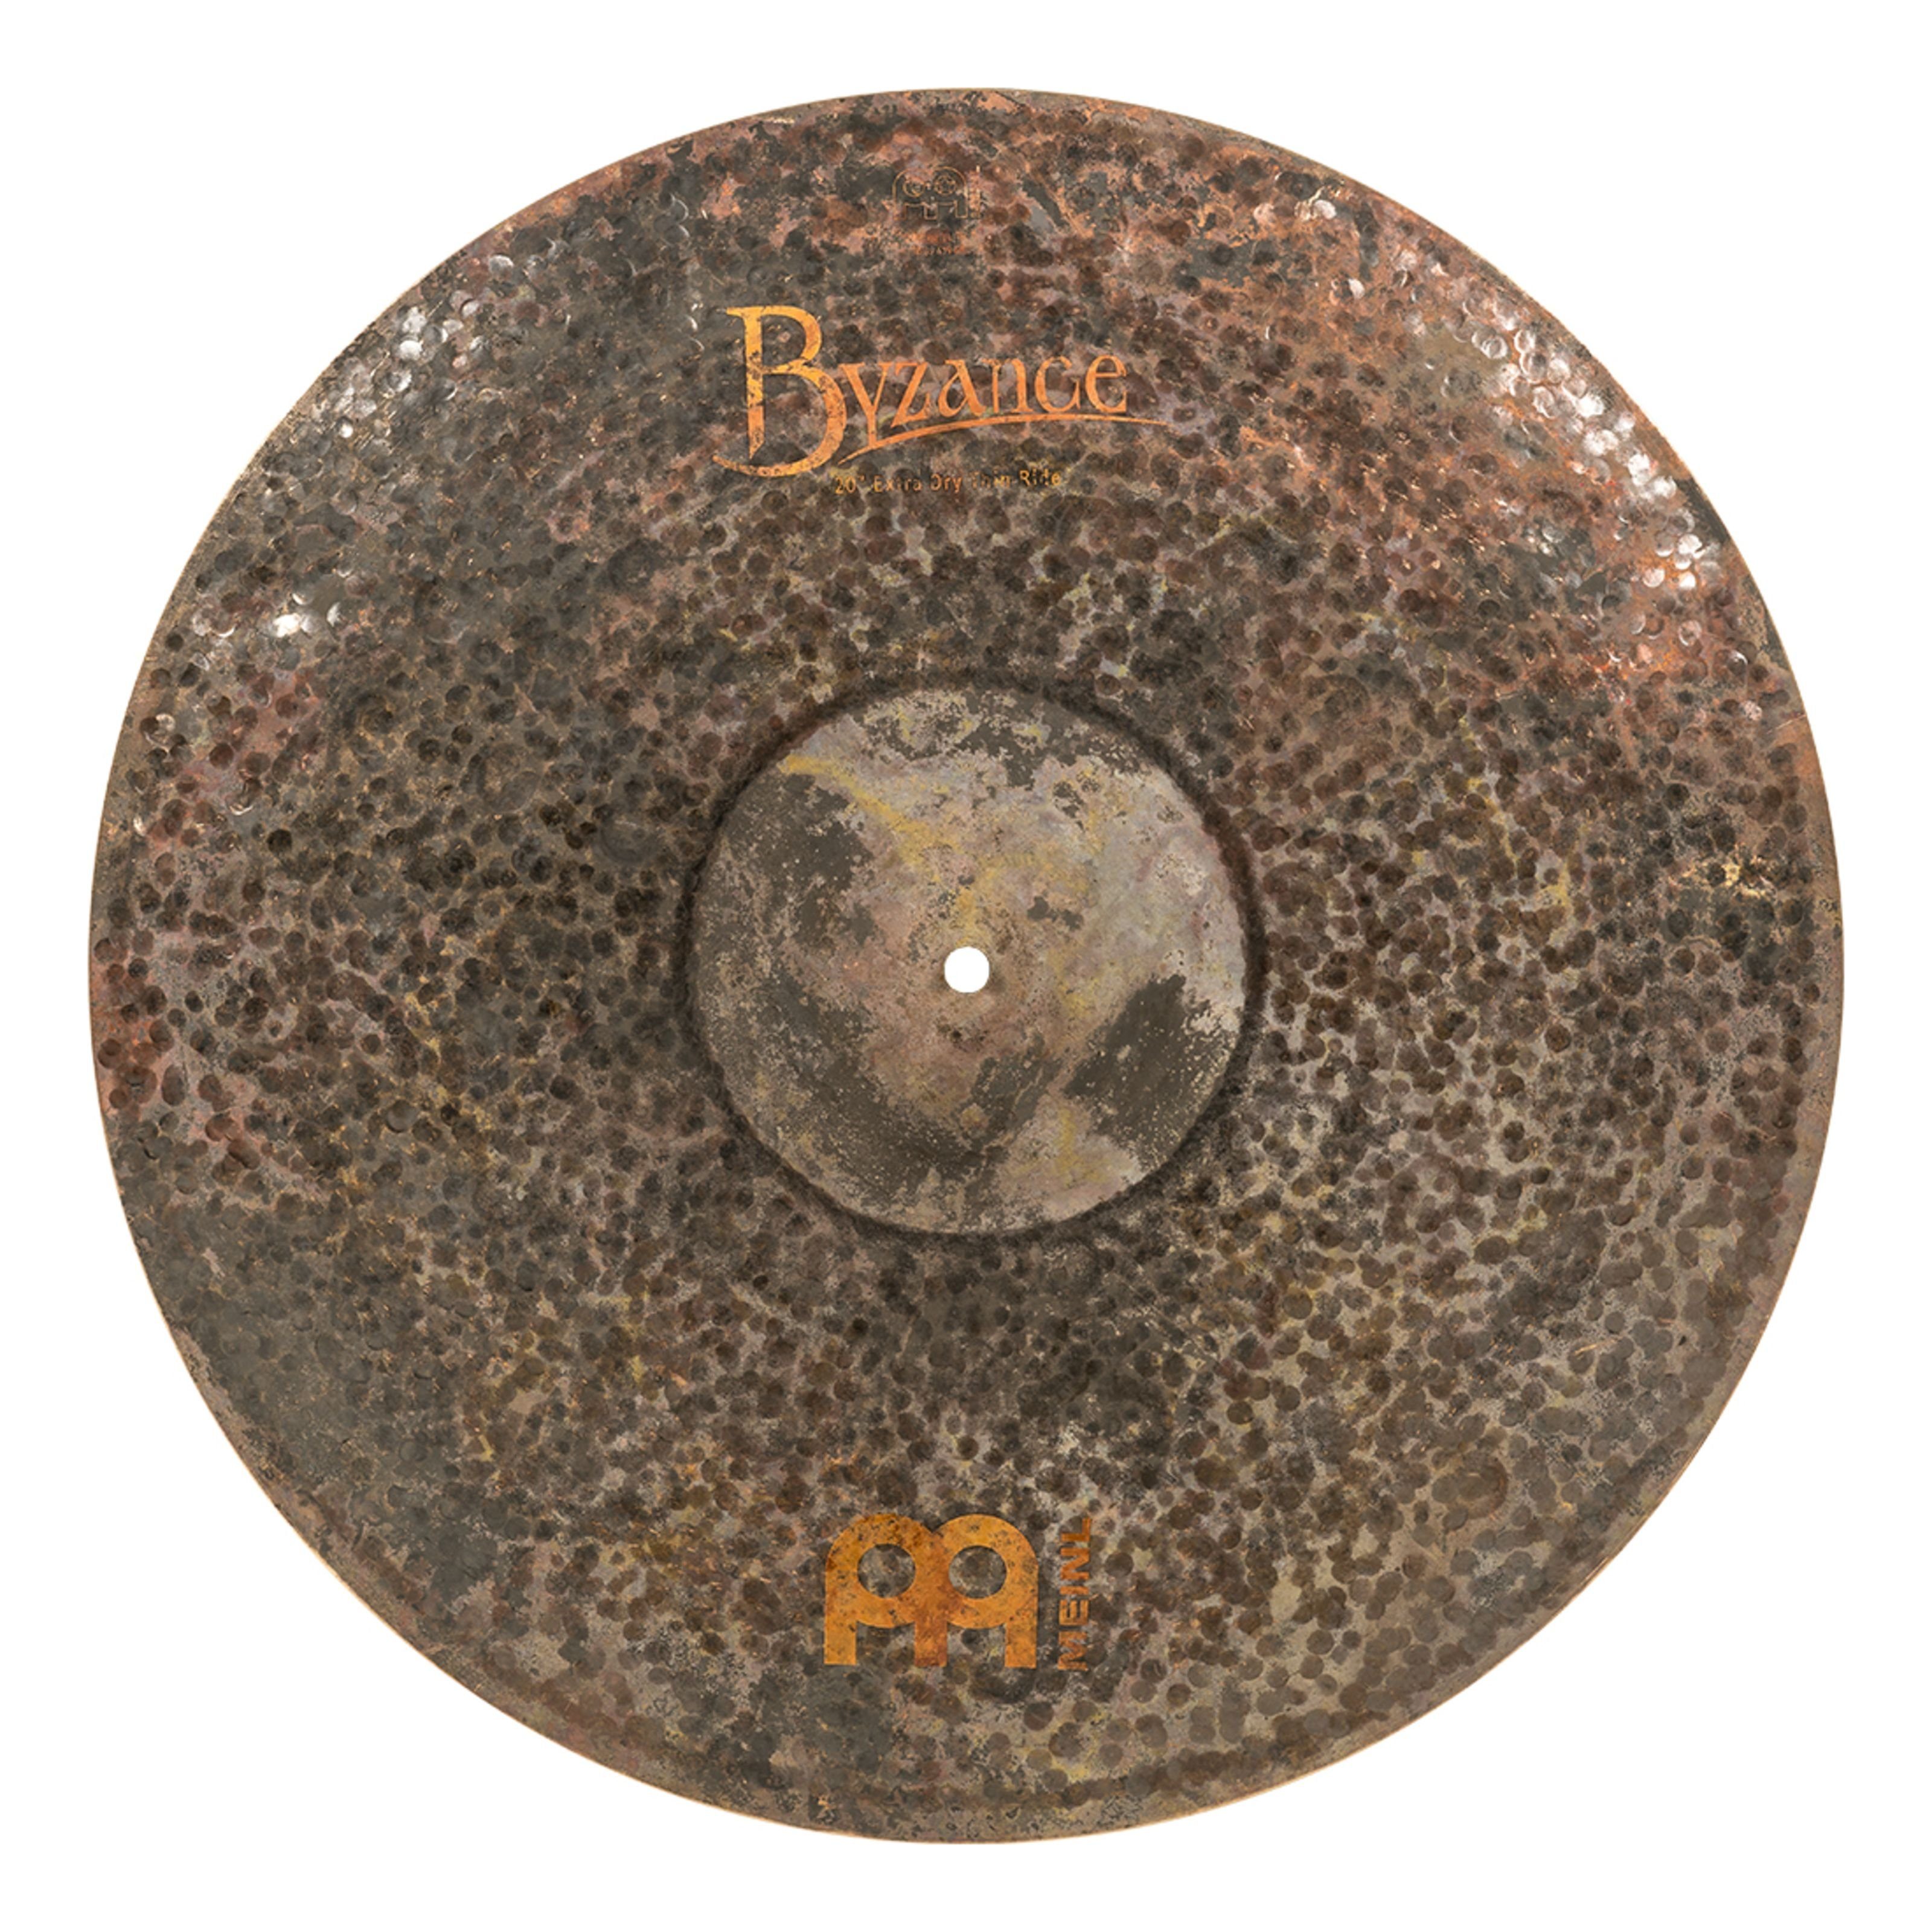 Ride 20", Spielzeug-Musikinstrument, Cymbal Byzance Extra Percussion B20EDTR, - Dry Ride Thin Meinl